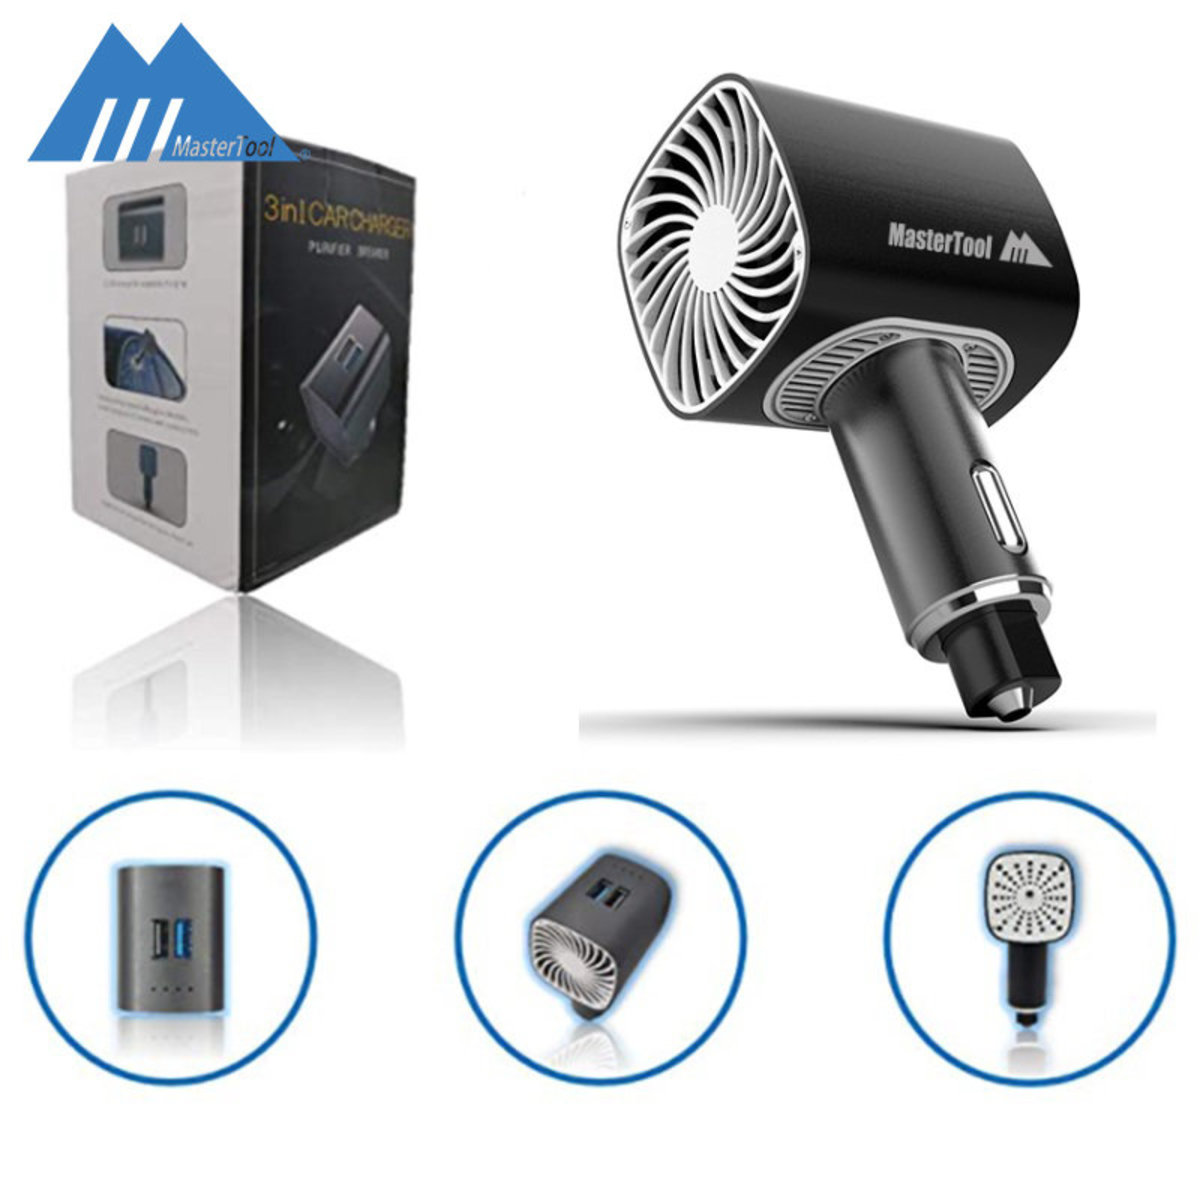 MasterTool - Car Charger，3 in 1 ionizer Air Purifier with Fan, Window Breaker, with USB QC 3.0 Fast Charging